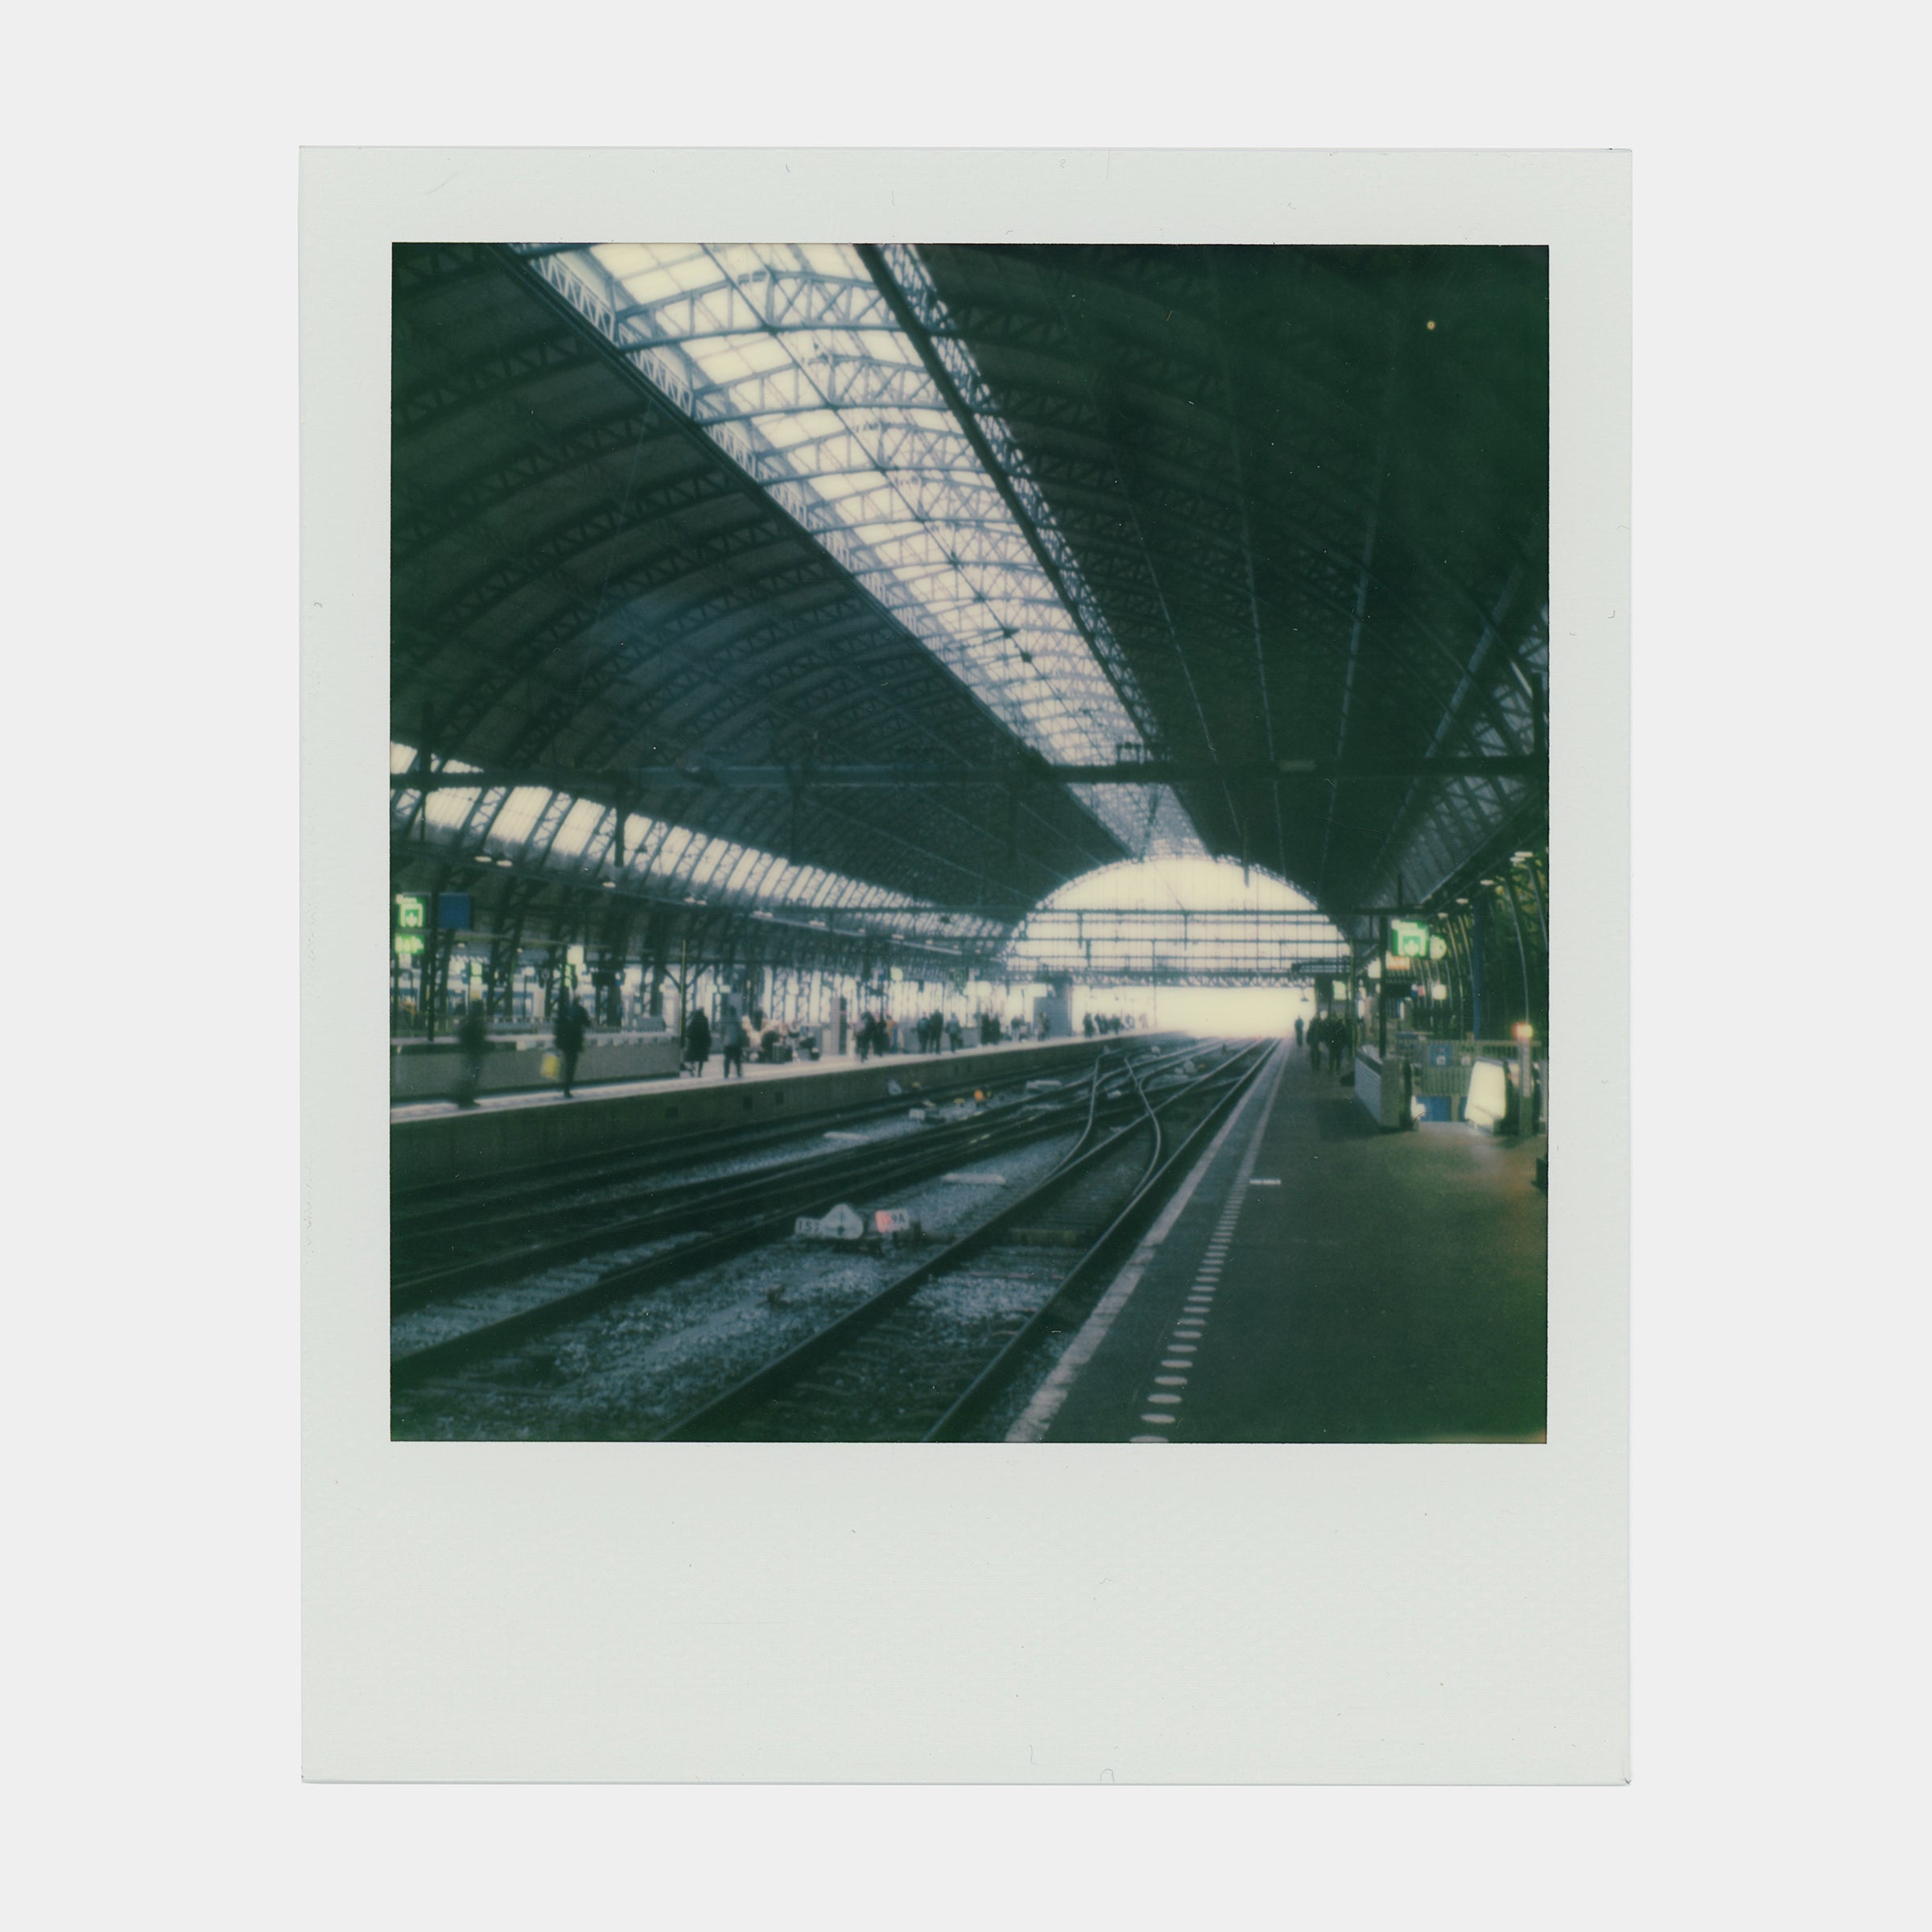 Expired Polaroid Color i-Type Instant Film - Five Pack